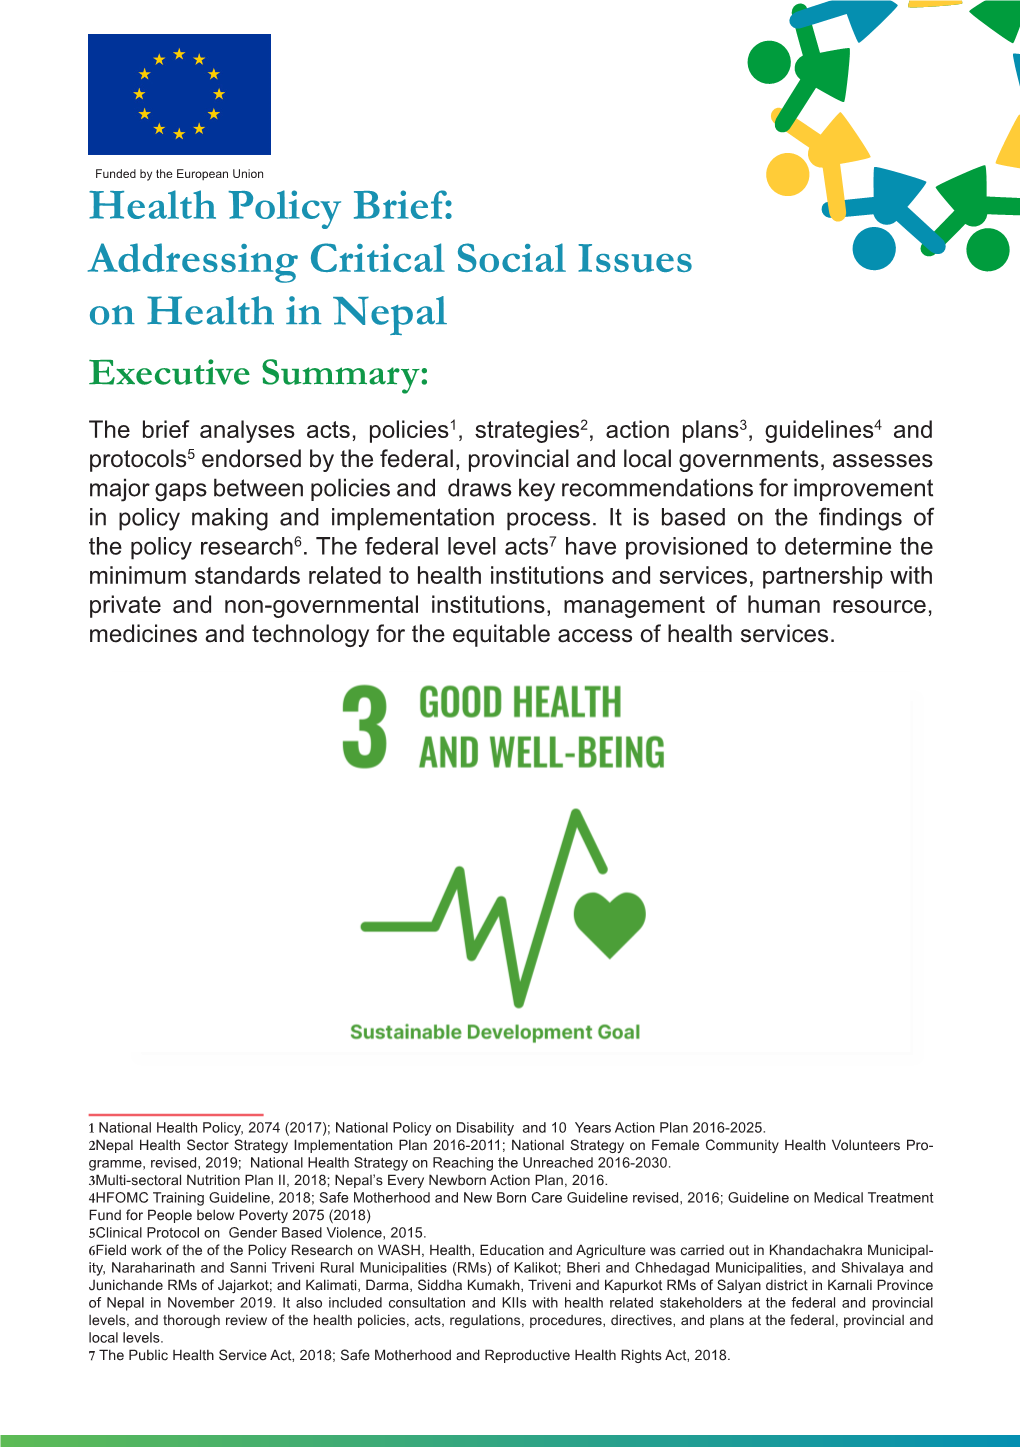 Addressing Critical Social Issues on Health in Nepal Health Policy